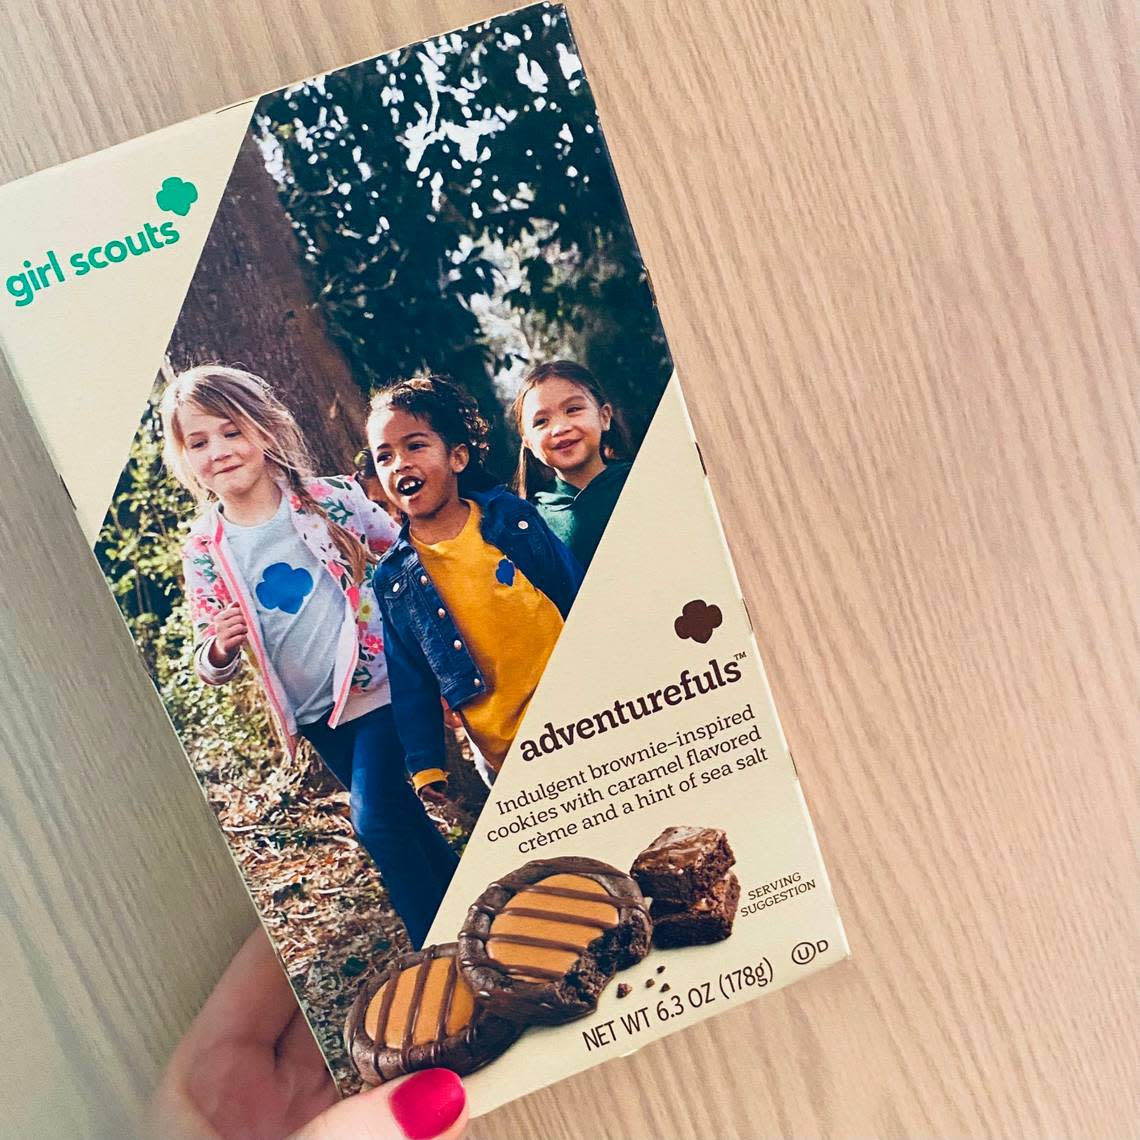 2022’s new Girl Scout cookie is Adventurefuls, a brownie-inspired cookie with a caramel center and hint of salt.